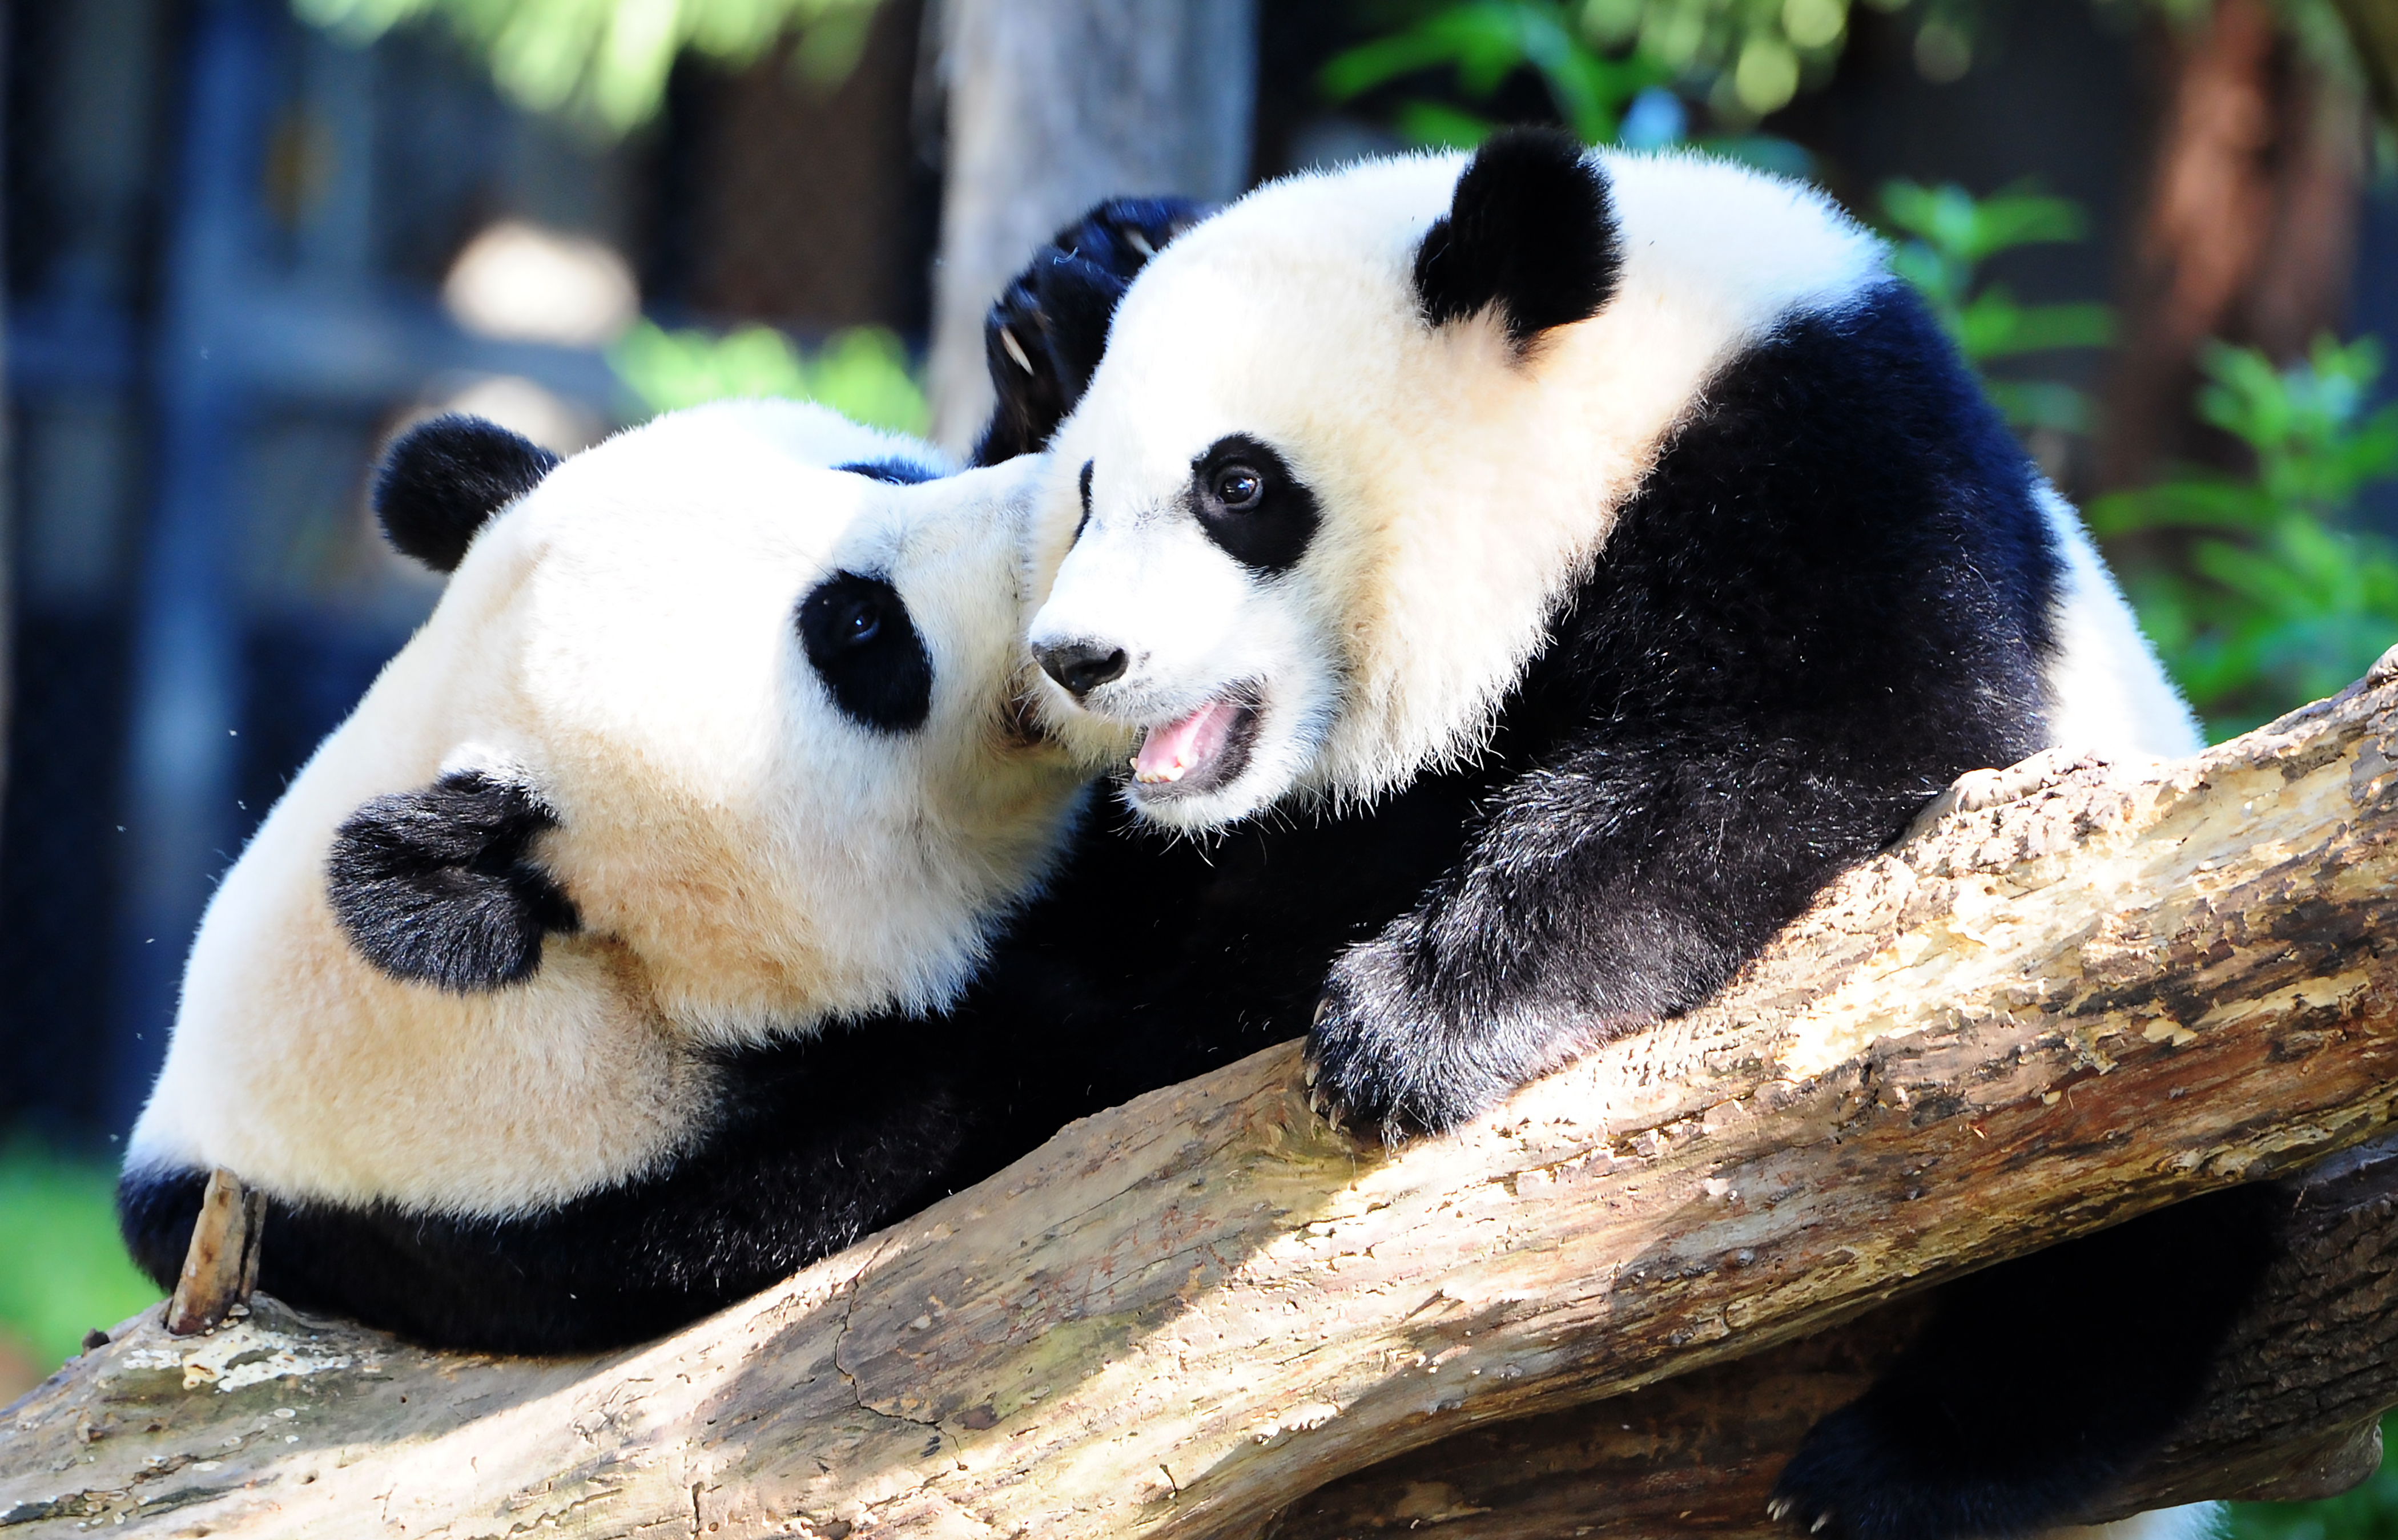 Giant panda Mei Xiang and her cub Bei Bei(R) play in their enclosure August 24, 2016 at the National Zoo in Washington, DC. Bei Bei celebrated his first birthday August 20, 2016. He is part of SinoAmerican panda diplomacy and will have to be sent to the People's Republic of China at the age of 4. / AFP PHOTO / Karen BLEIER